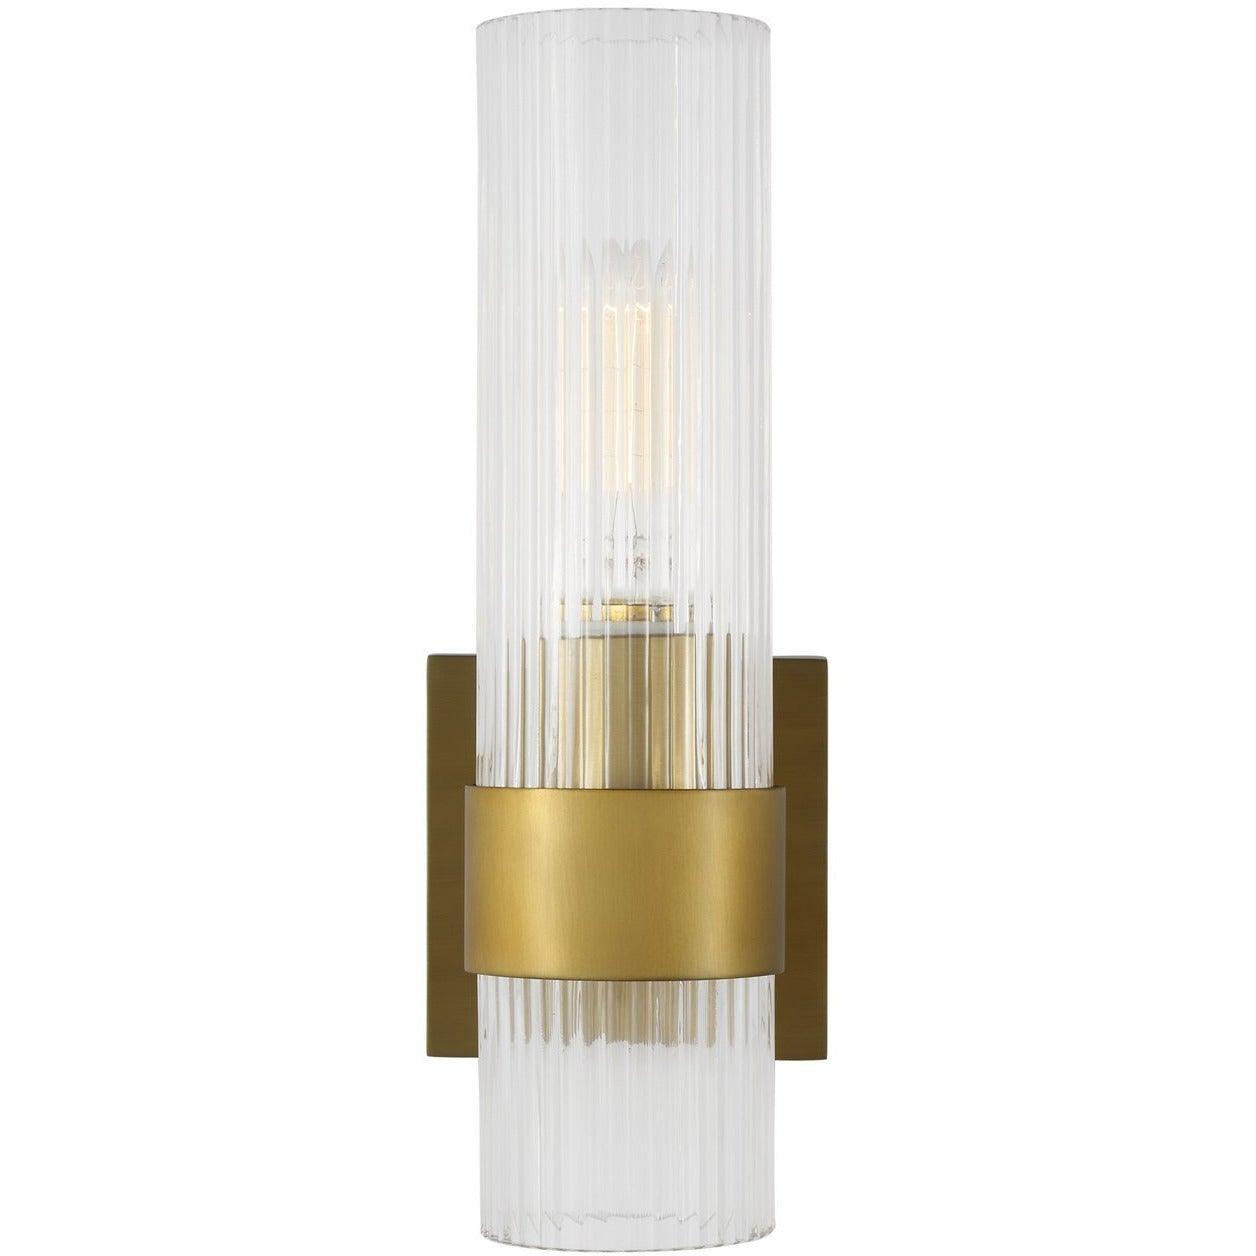 Visual Comfort Studio Collection CC12716BBS at Sea Gull Lighting Store  Contemporary,Modern